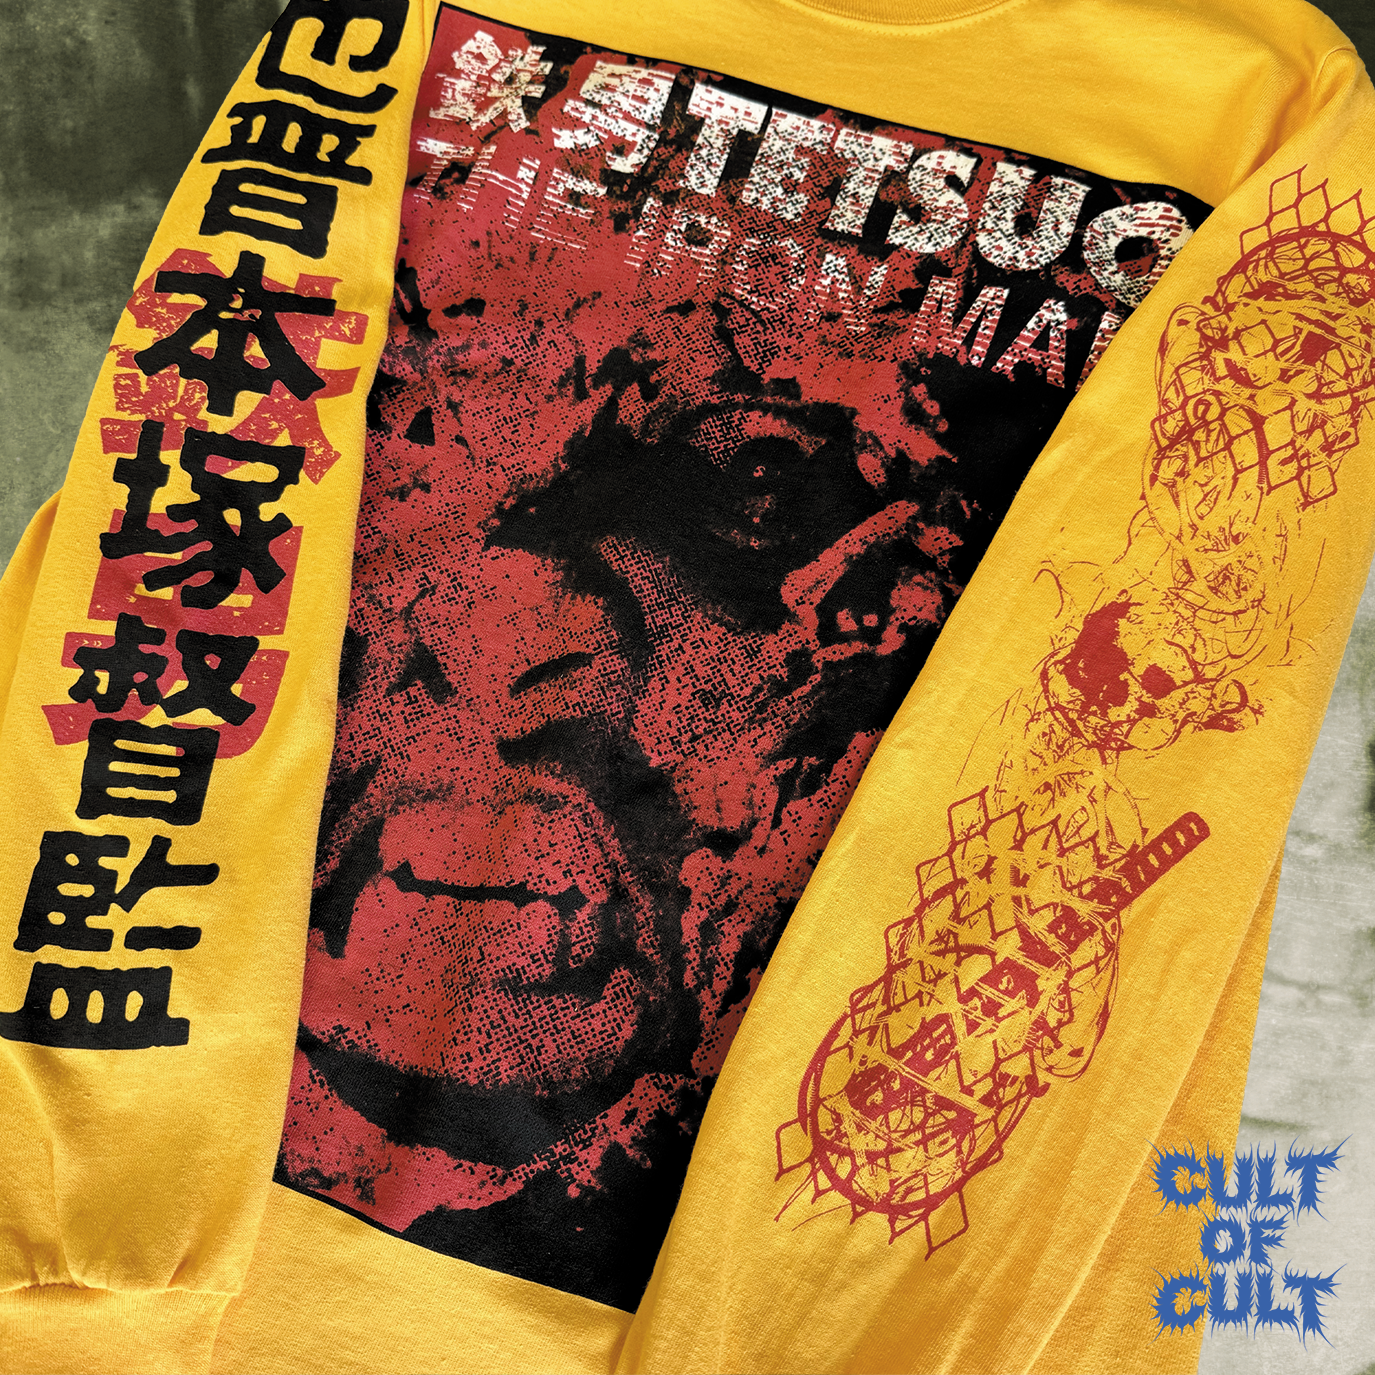 The front and sleeves of the yellow version of the shirt. There is a zoomed in detail shot of both sleeves. One sleeve has the movie title and directors name in Japanese characters. The other sleeve features a collage of metal and chain link.